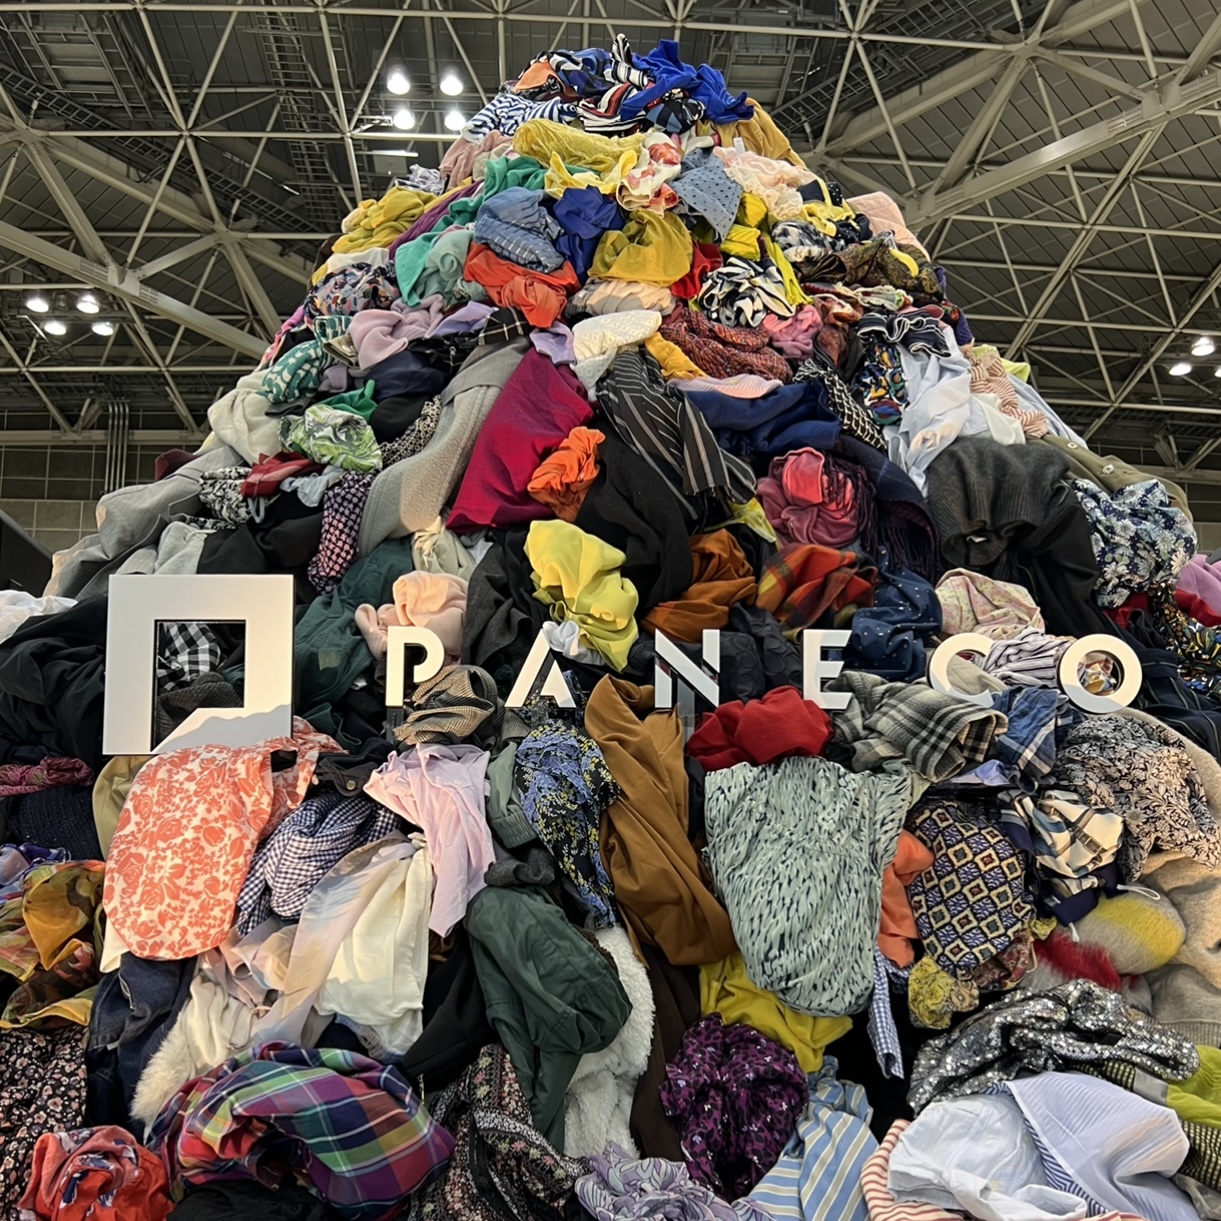 Clothing-Clothes and Textile Recycling | PANECO®